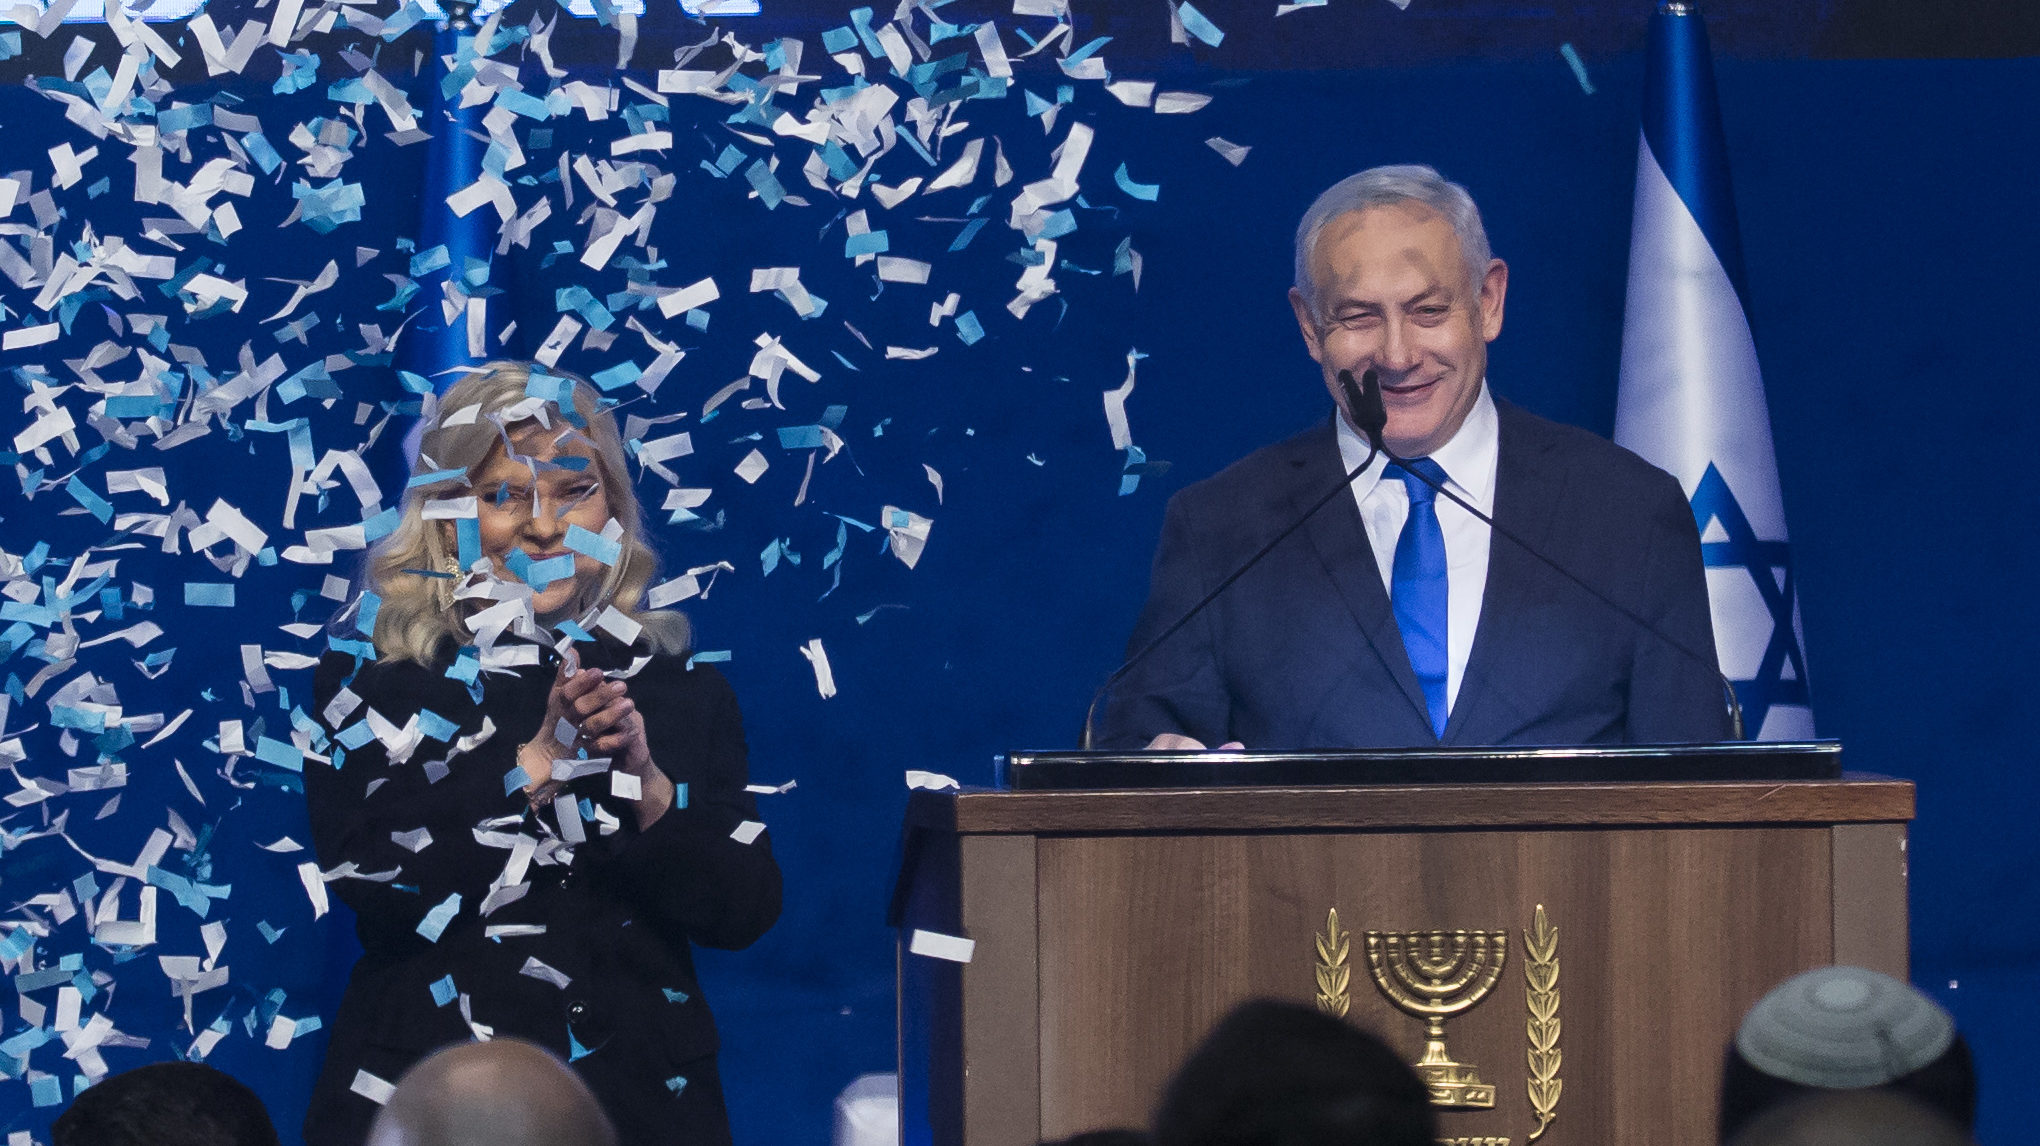 Netanyahu Appears to Trounce Political Rival, but Not Clear if He Can Form Coalition